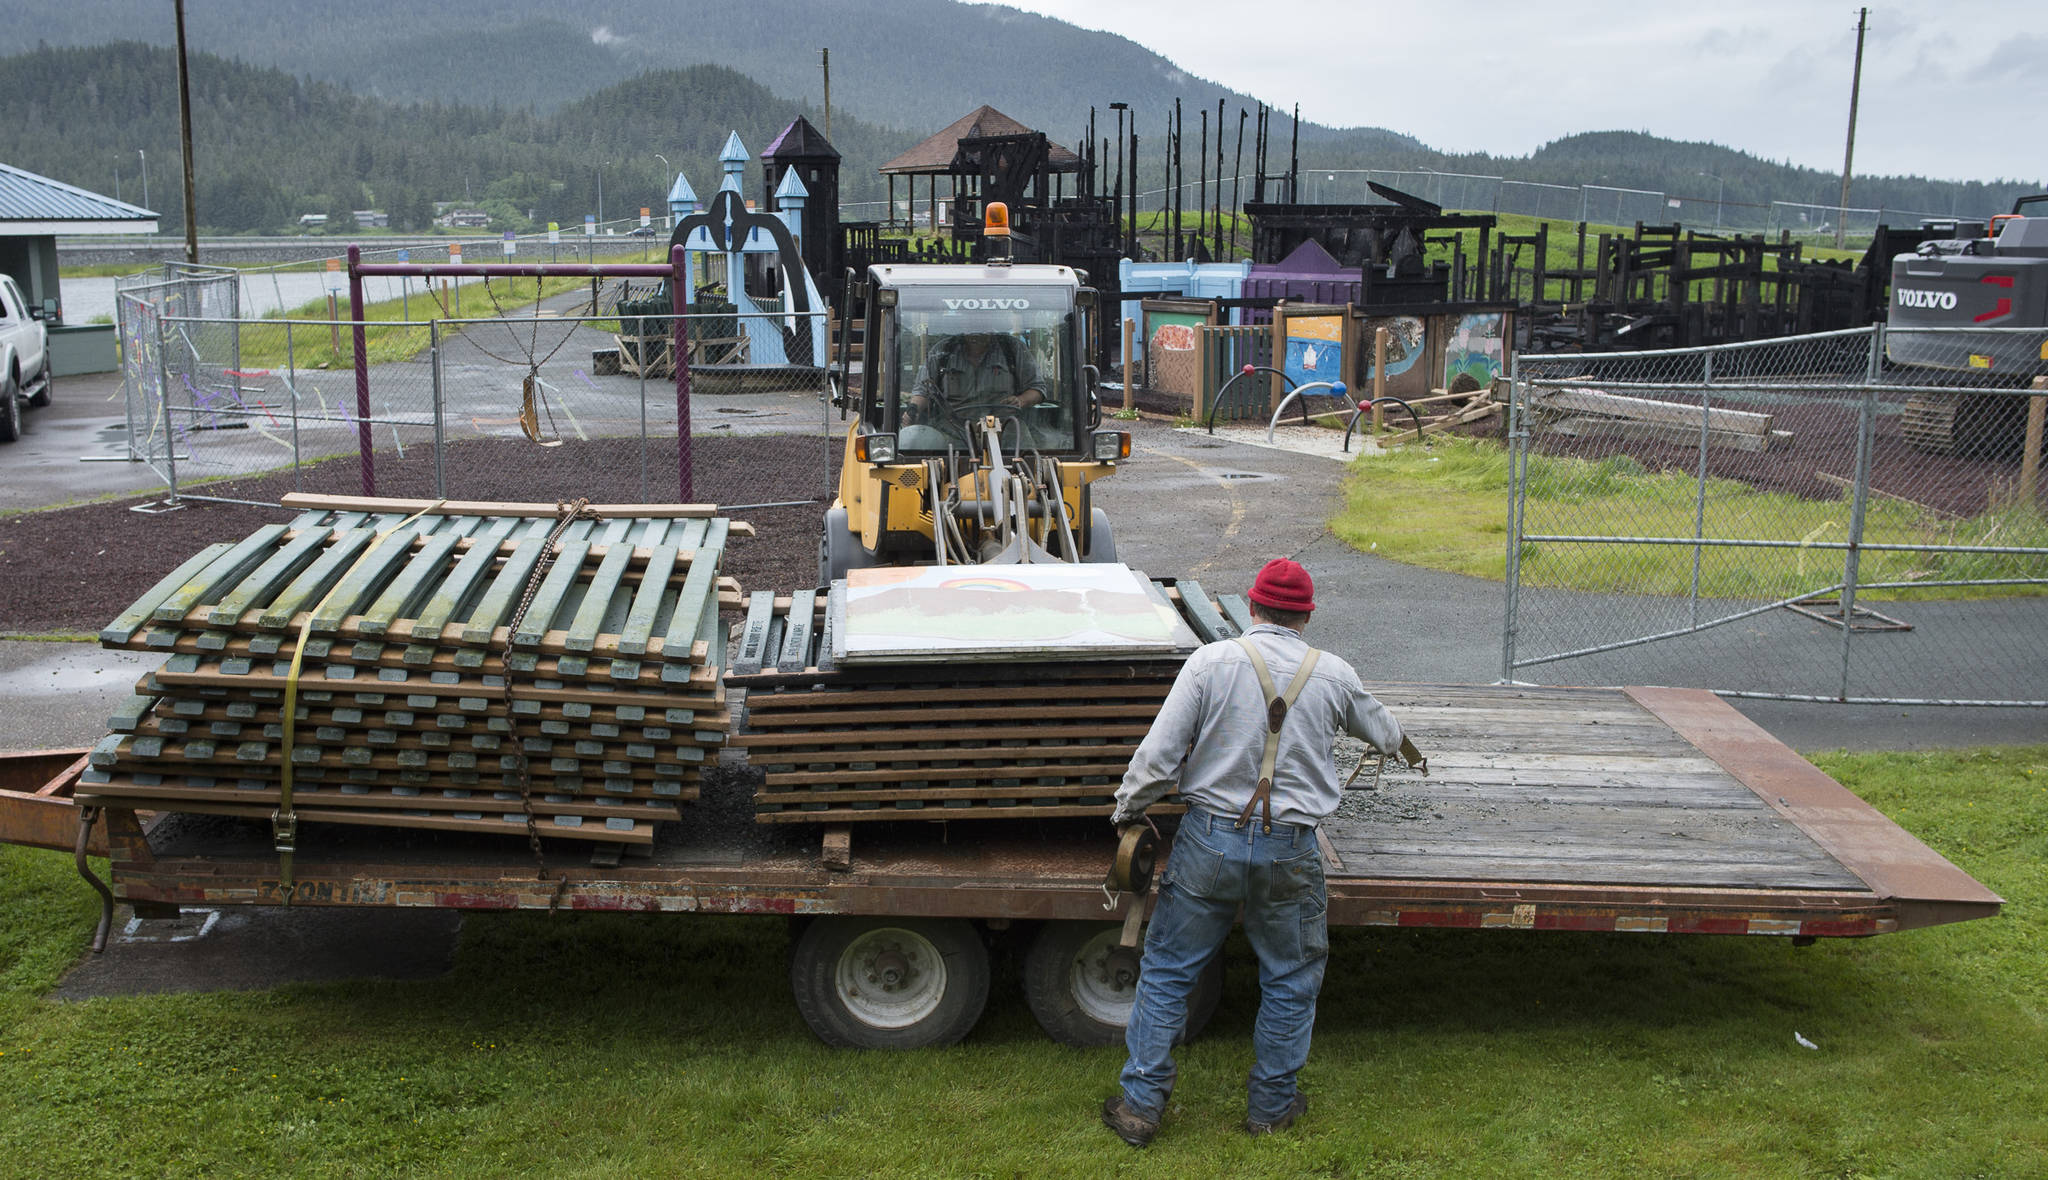 Sections of picket fence are loaded onto a flatbed trailer as work begins on the demolition of Project Playground at Twin Lakes on Tuesday, June 20, 2017. Recent tests revealed that soil at the site is not contaminated, and the city will be planting grass at the site soon. (Michael Penn | Juneau Empire)